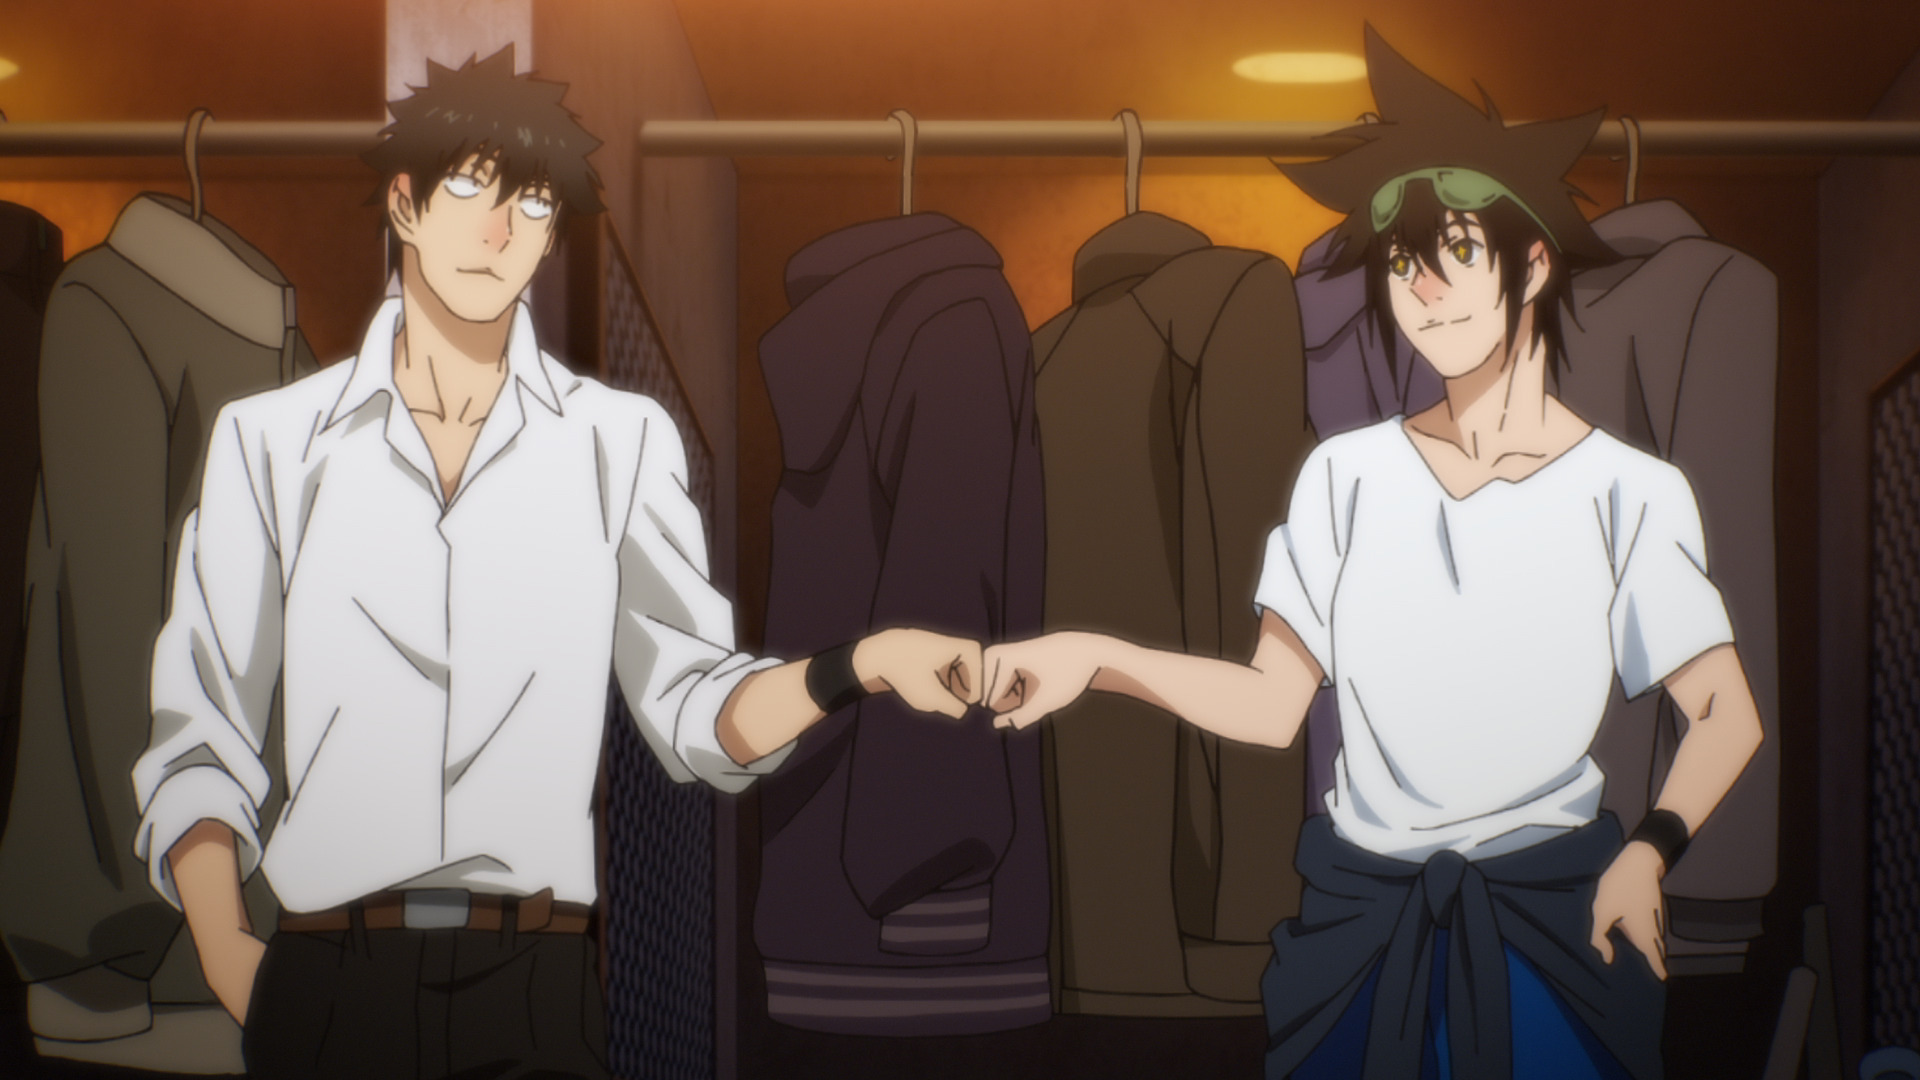 The God of High School Episode 5 - Showdown and Friendship (Review)